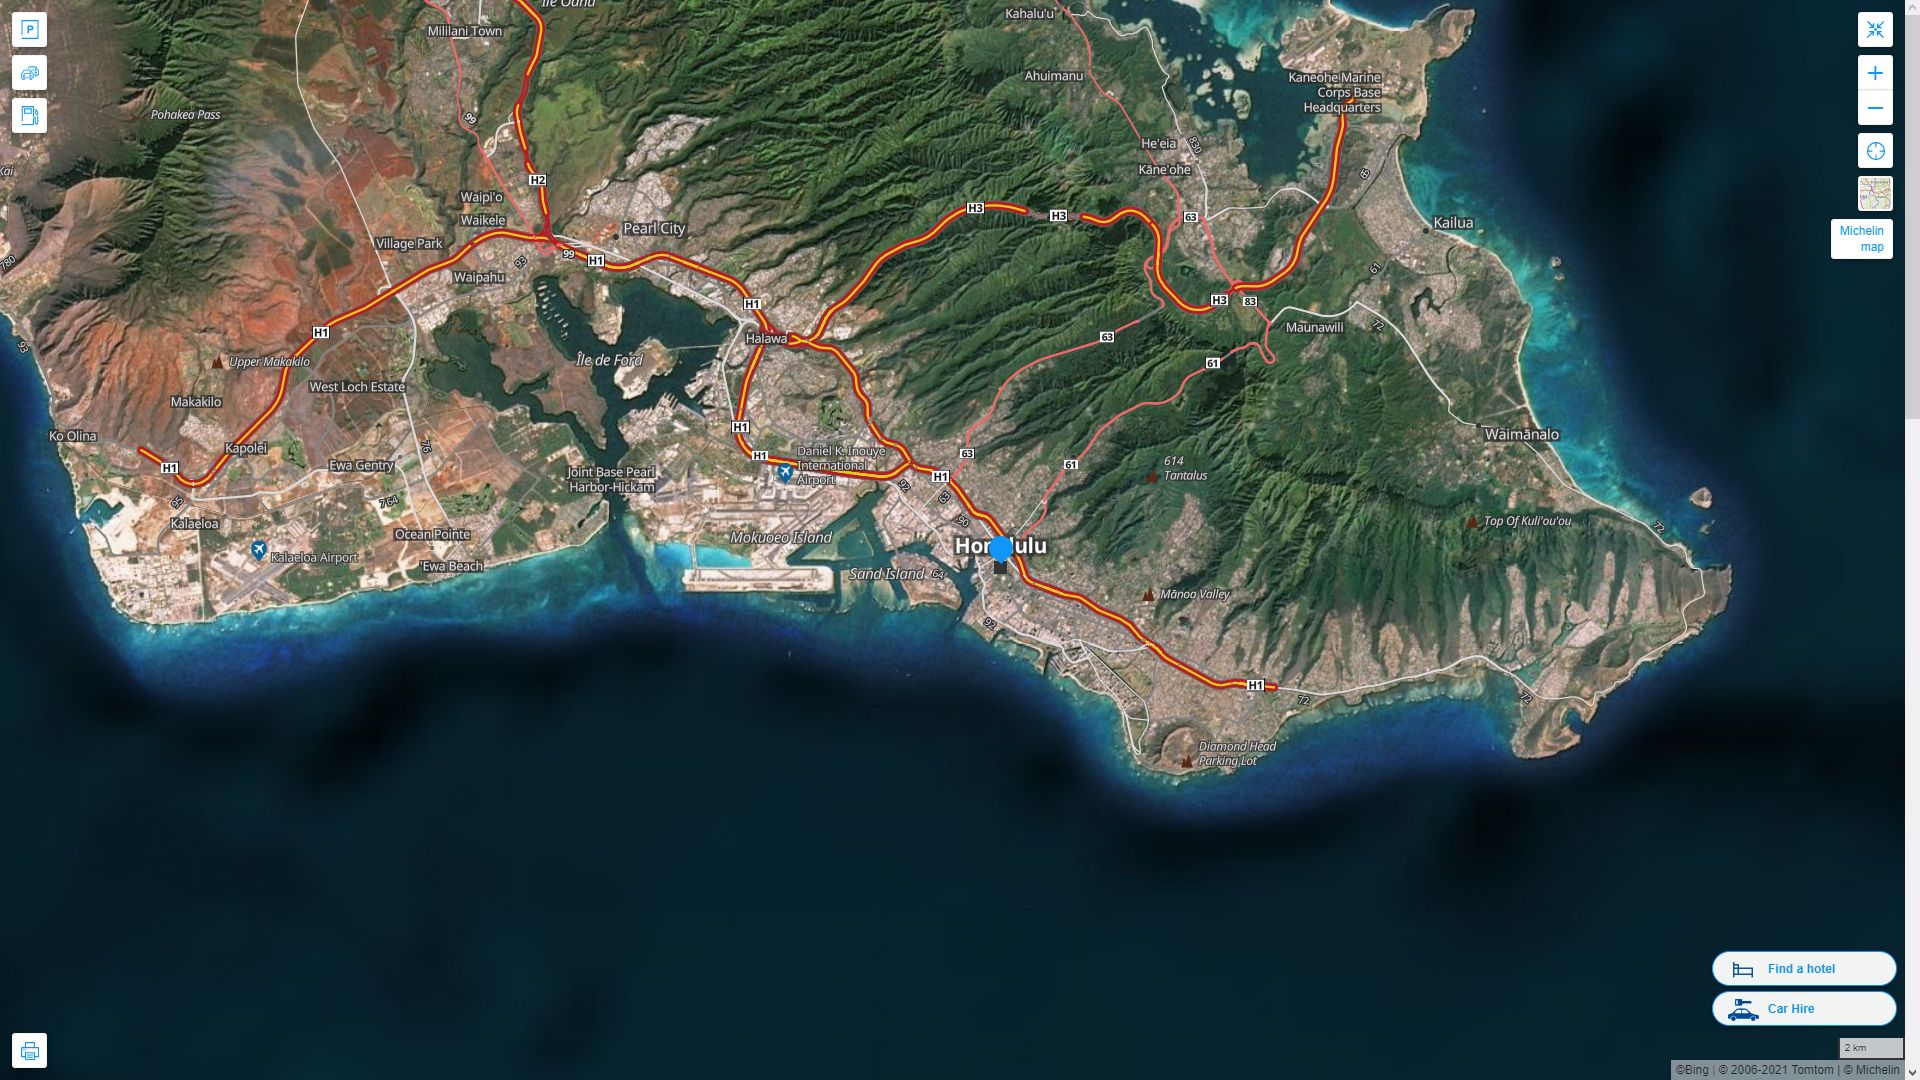 Honolulu Hawaii Highway and Road Map with Satellite View